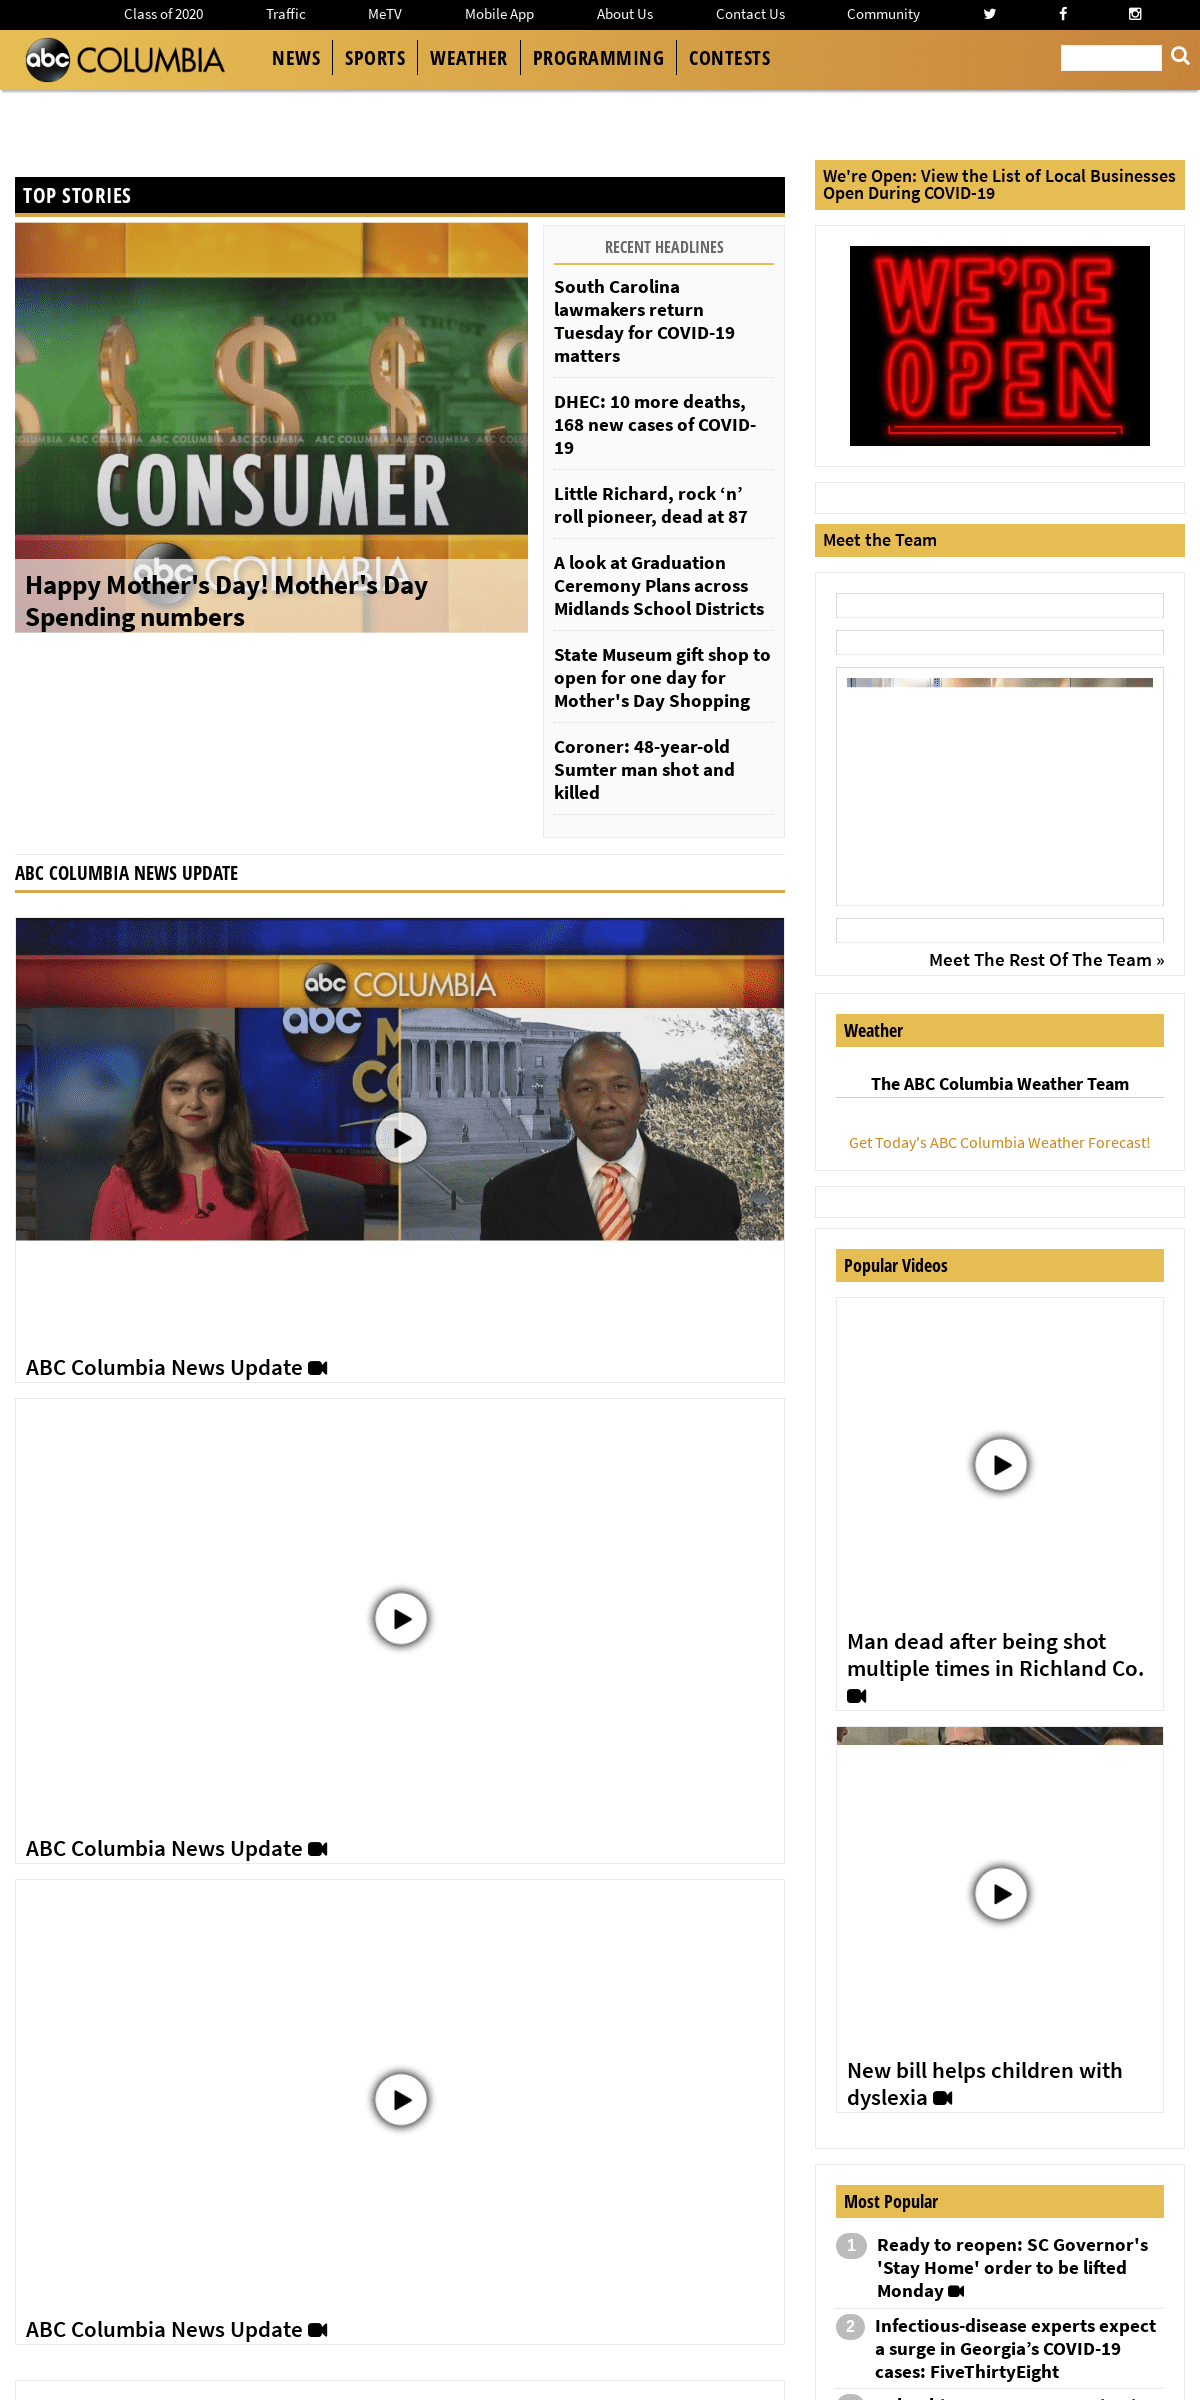 A complete backup of abccolumbia.com